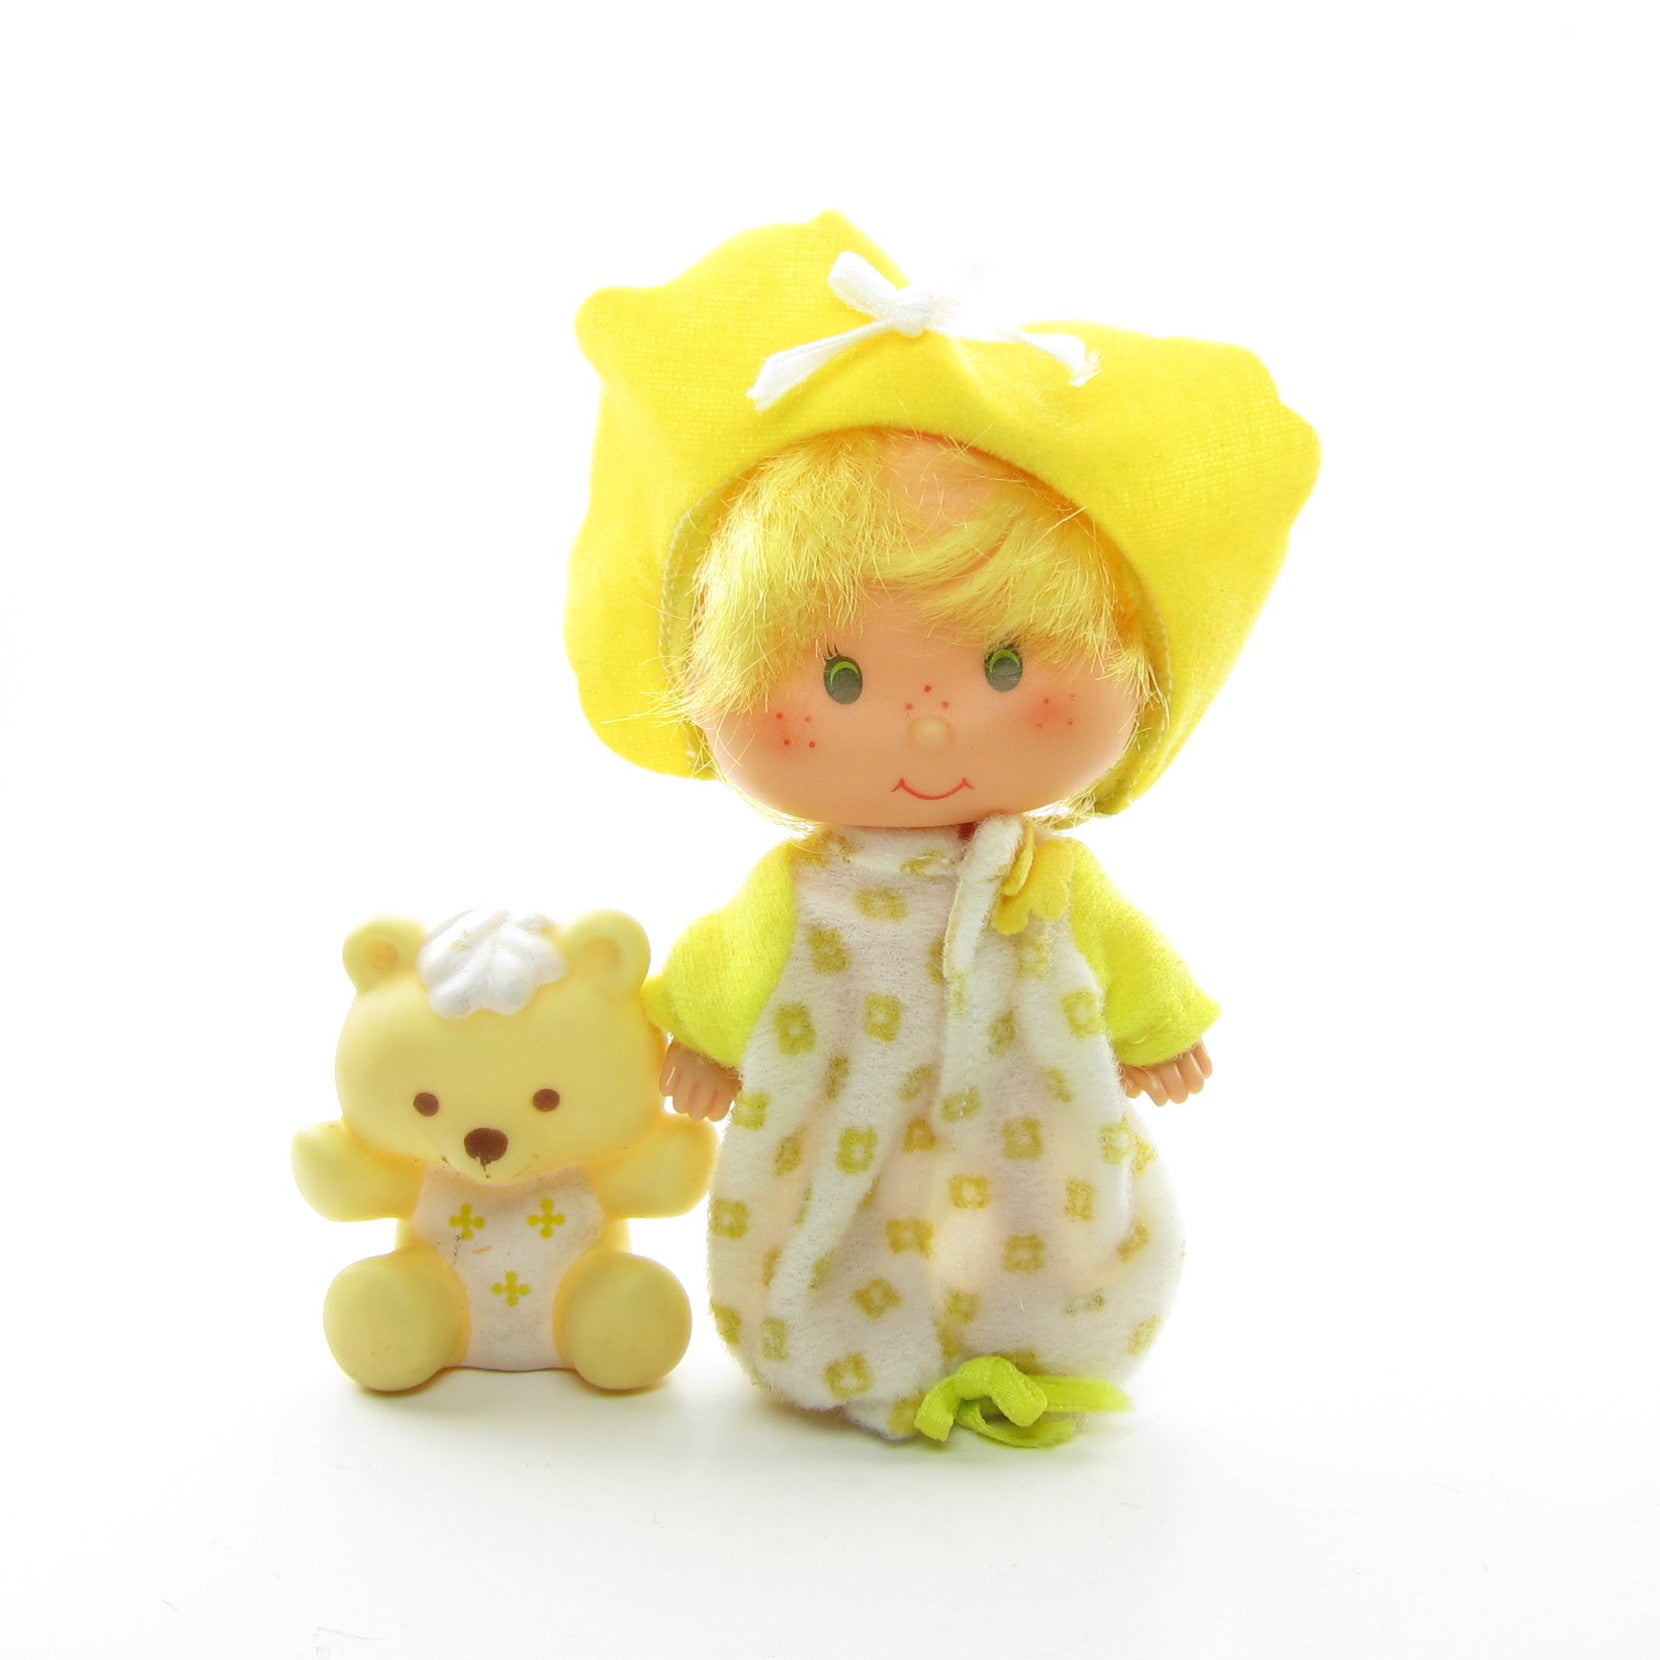 Strawberry Shortcake Butter Cookie doll with Jelly Bear pet